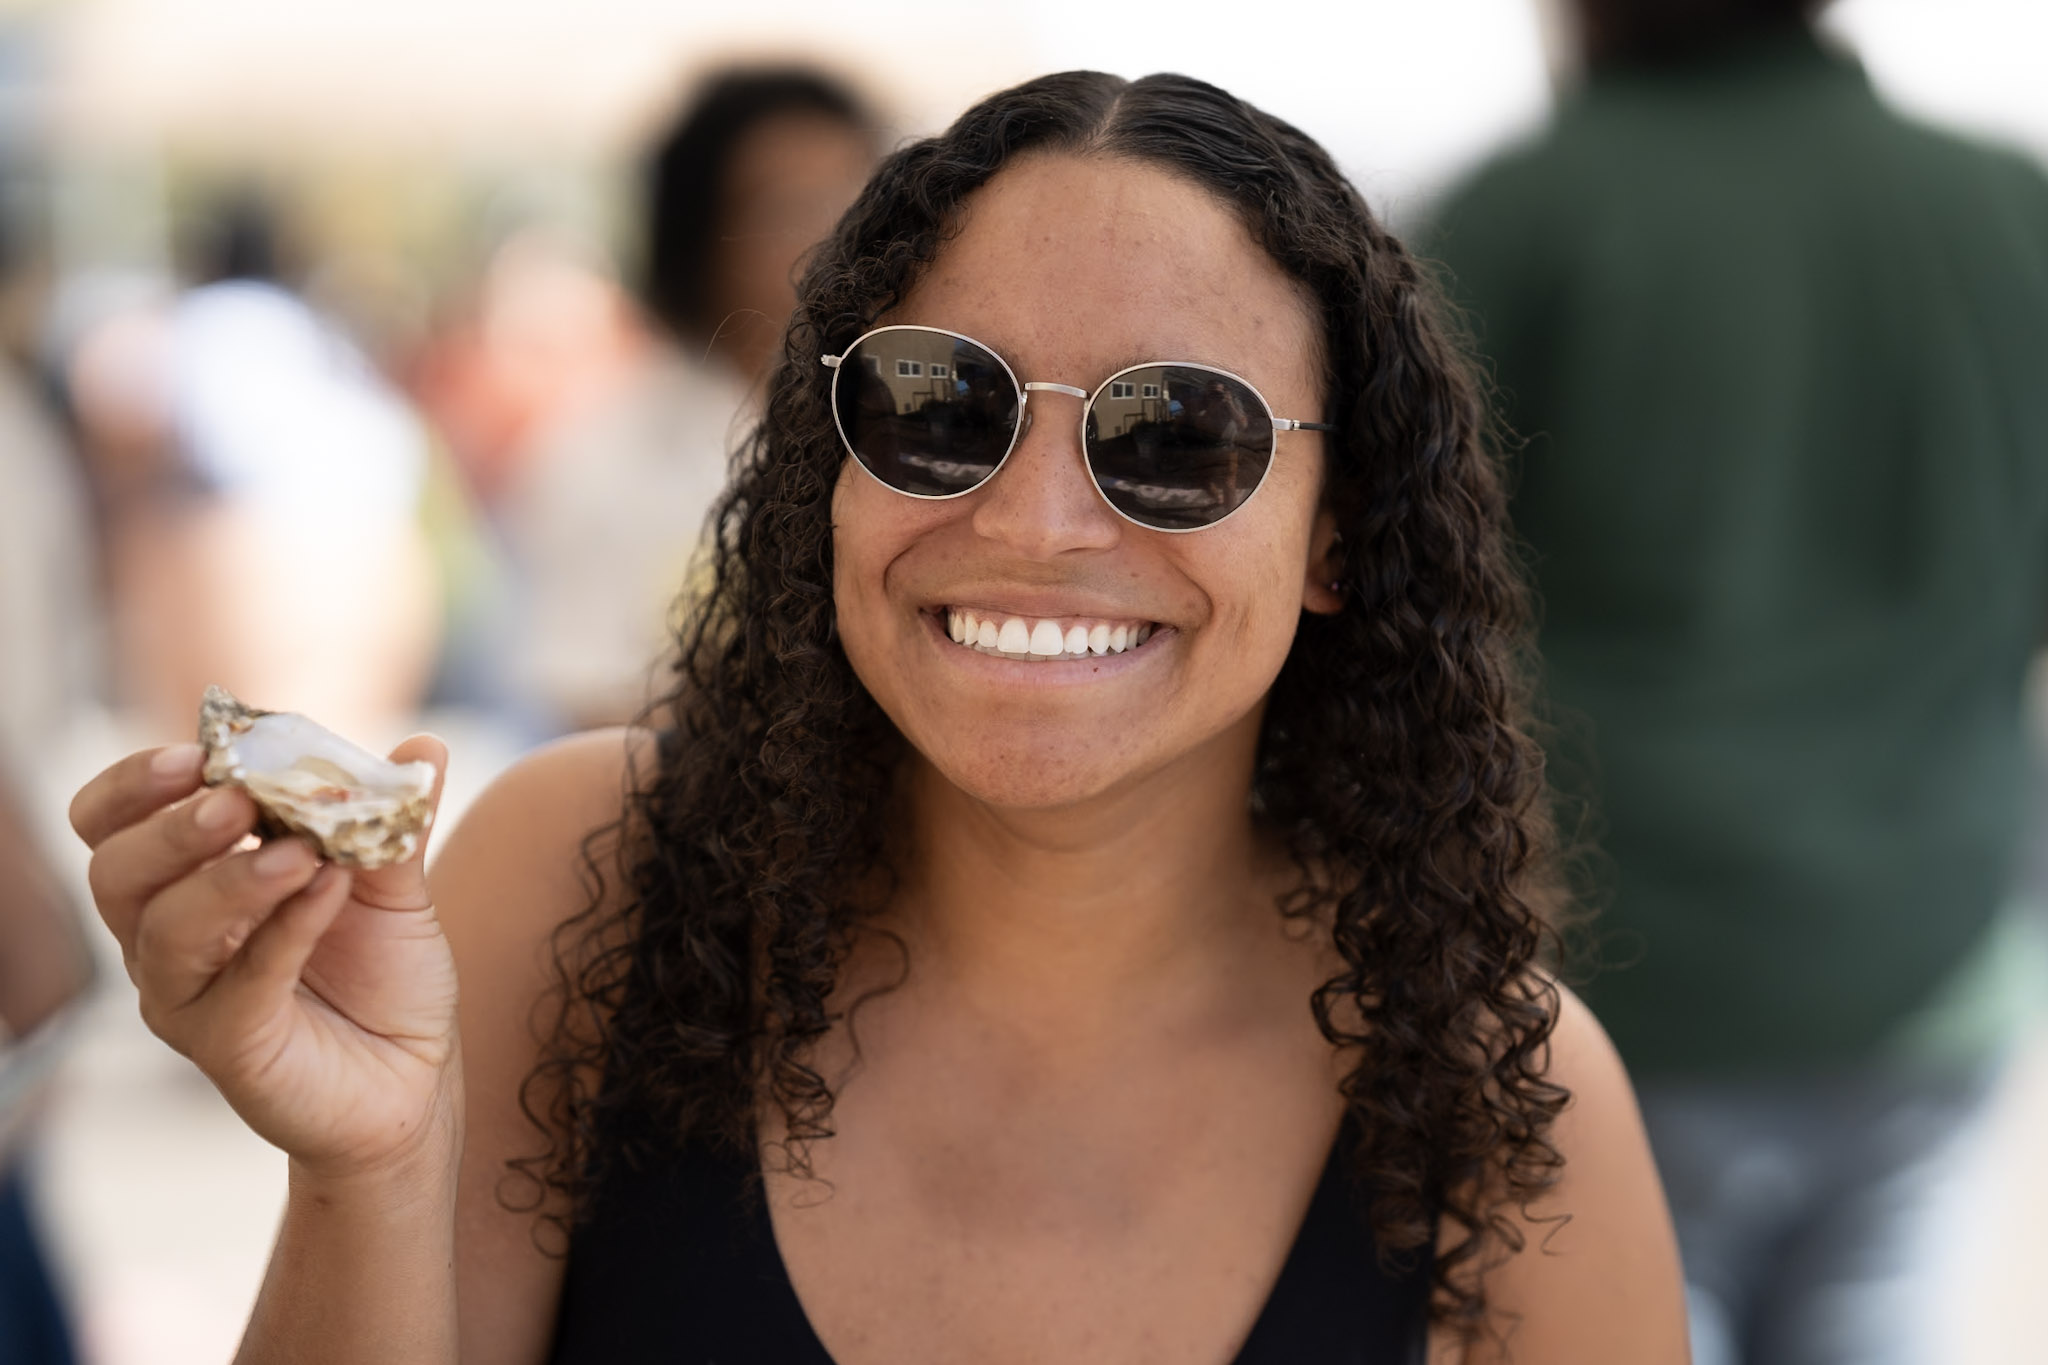 a person wearing sunglasses smiles at the camera while holding an oyster in one hand